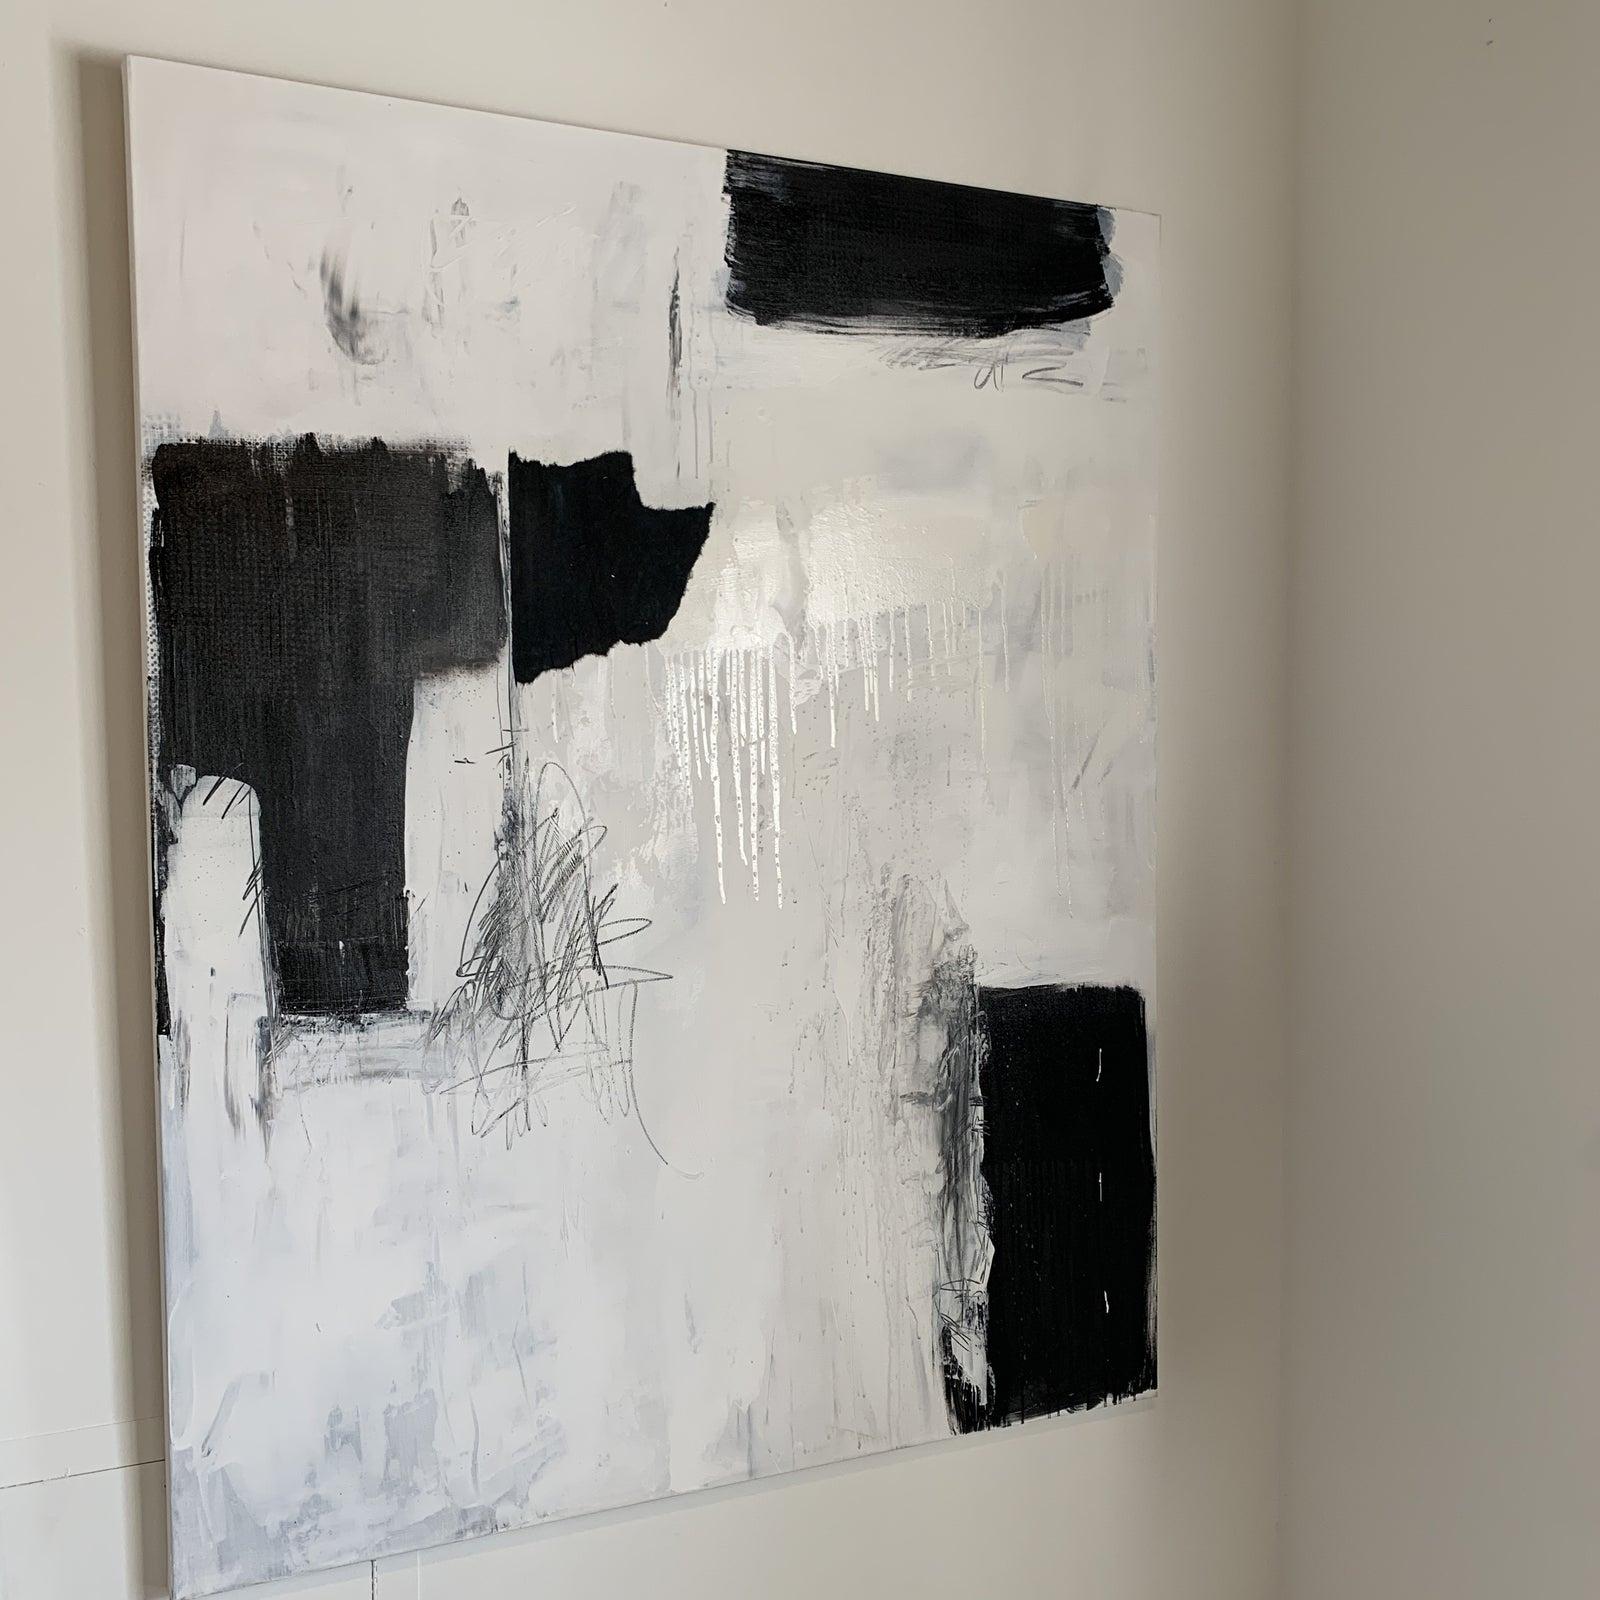 Artist: Joe Adams
Modern and Strong
48 x 60 Wired and ready to hang. Gallery wrapped canvas
Black , white , charcoal grey and silver 
Mixed Media 